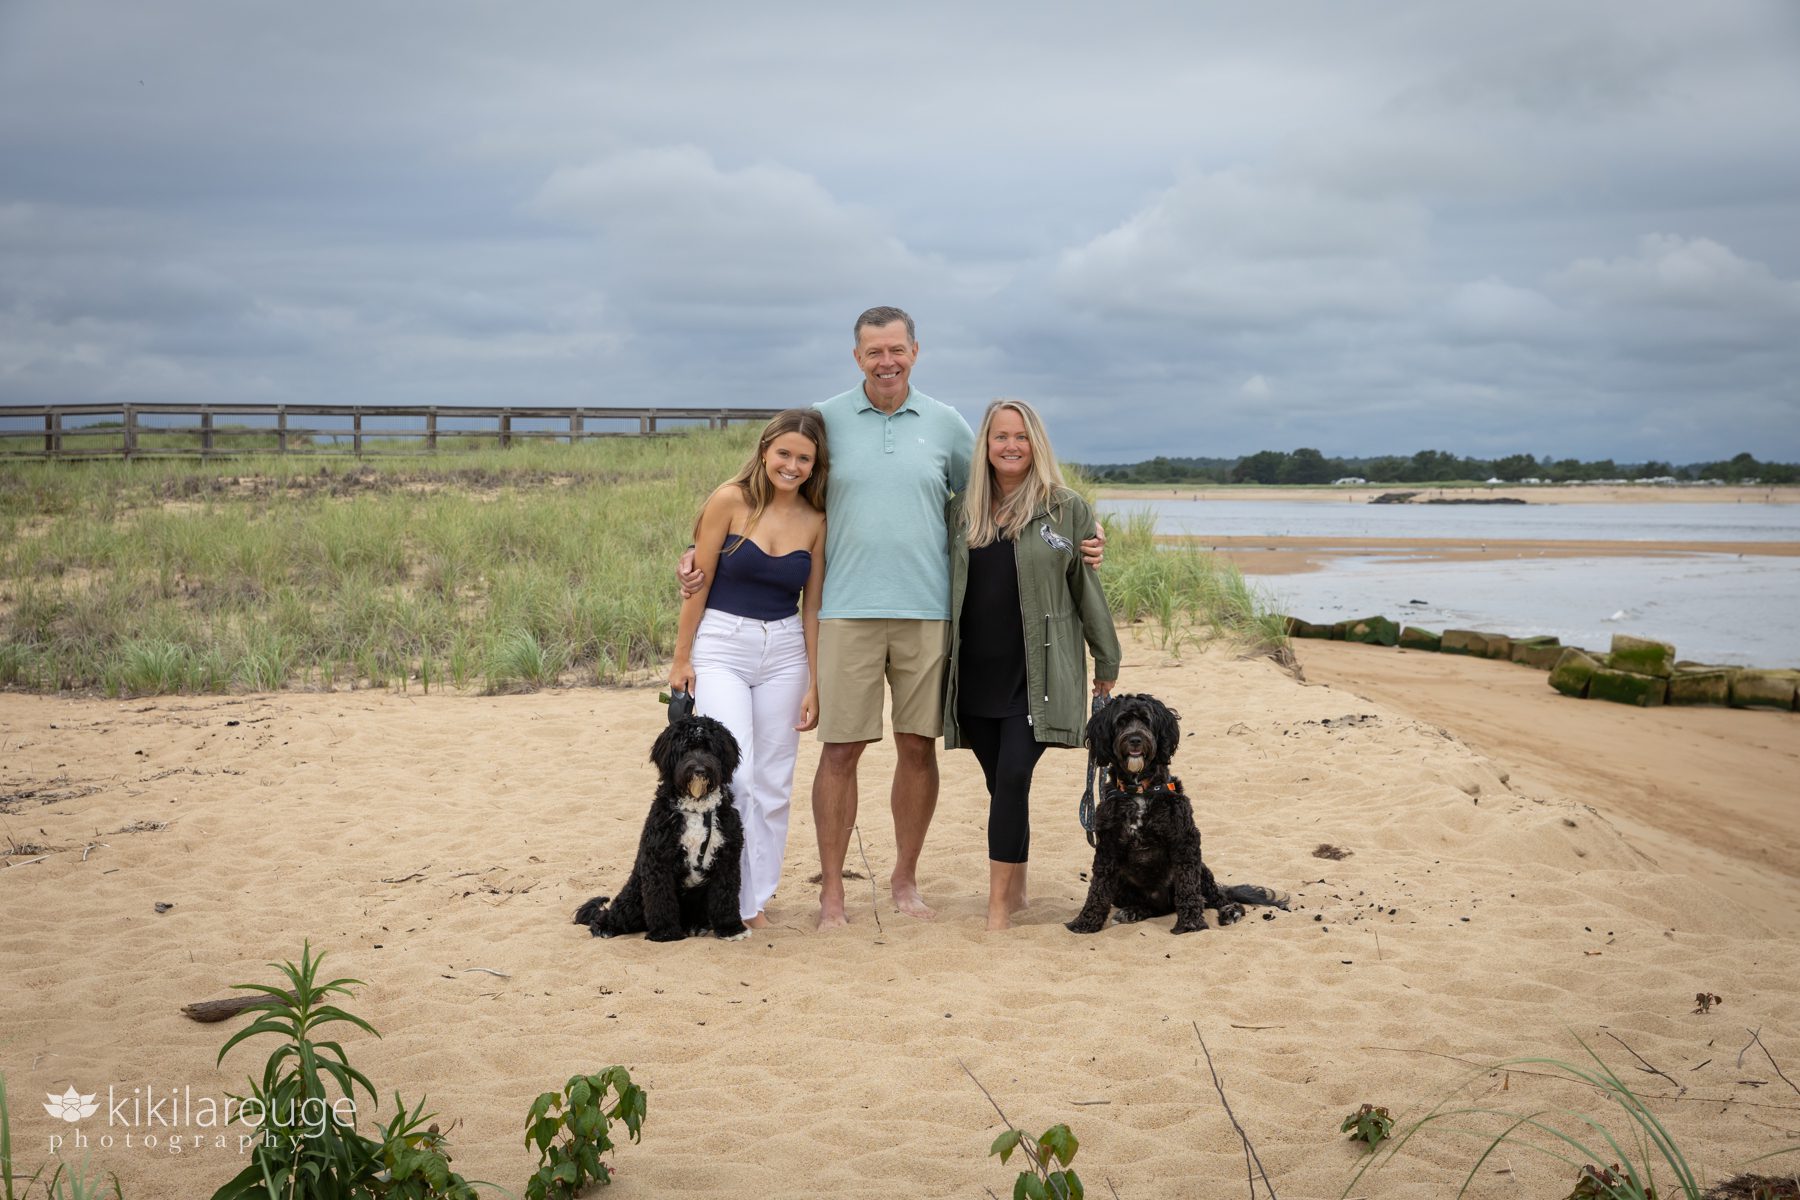 Senior girl in white jeans and blue tank top with Mom and Dad and two Portuguese water dogs on Plum Island Beach standing in dunes